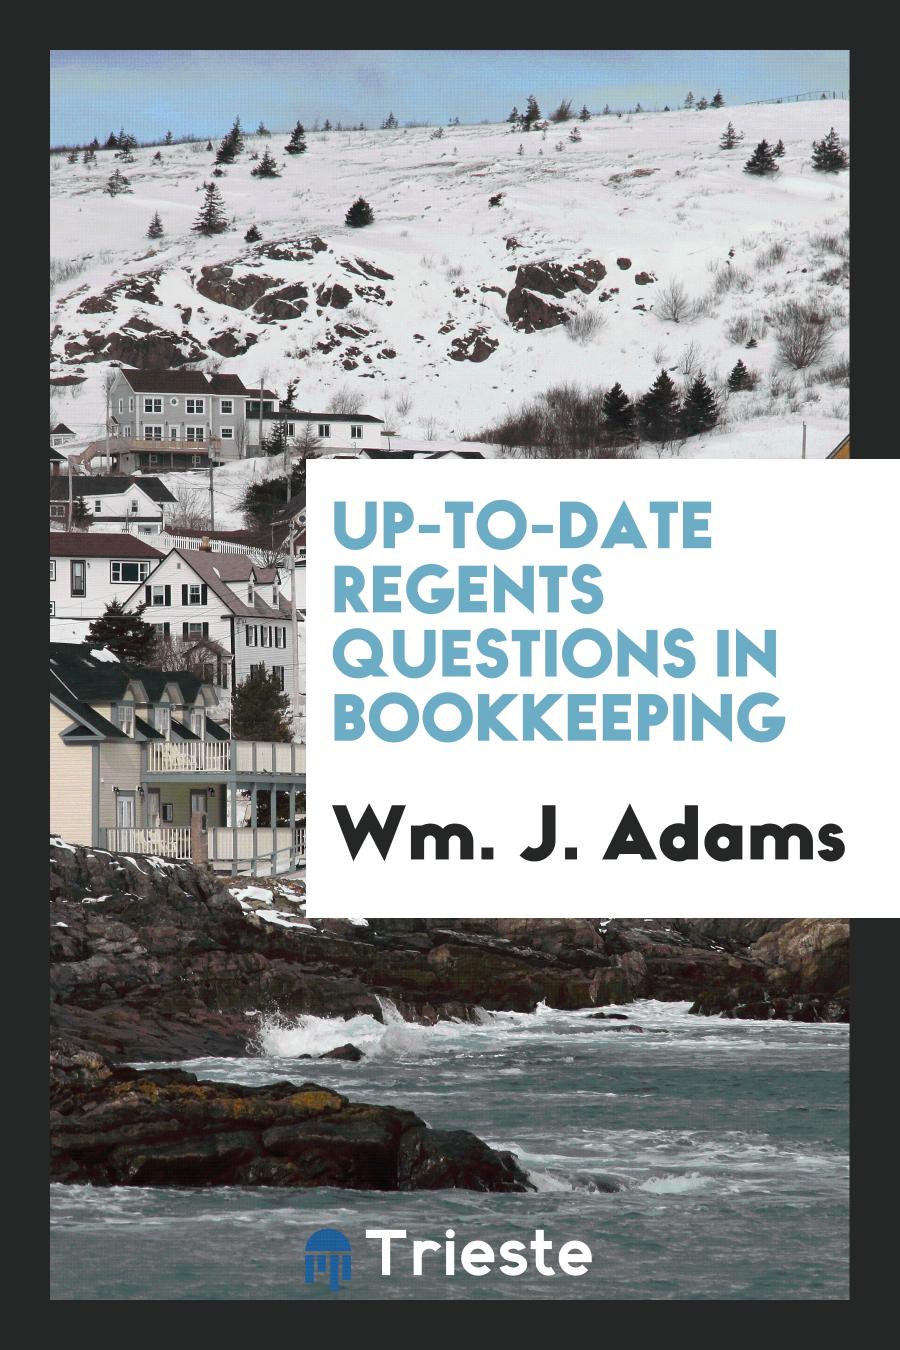 Up-to-date regents questions in bookkeeping